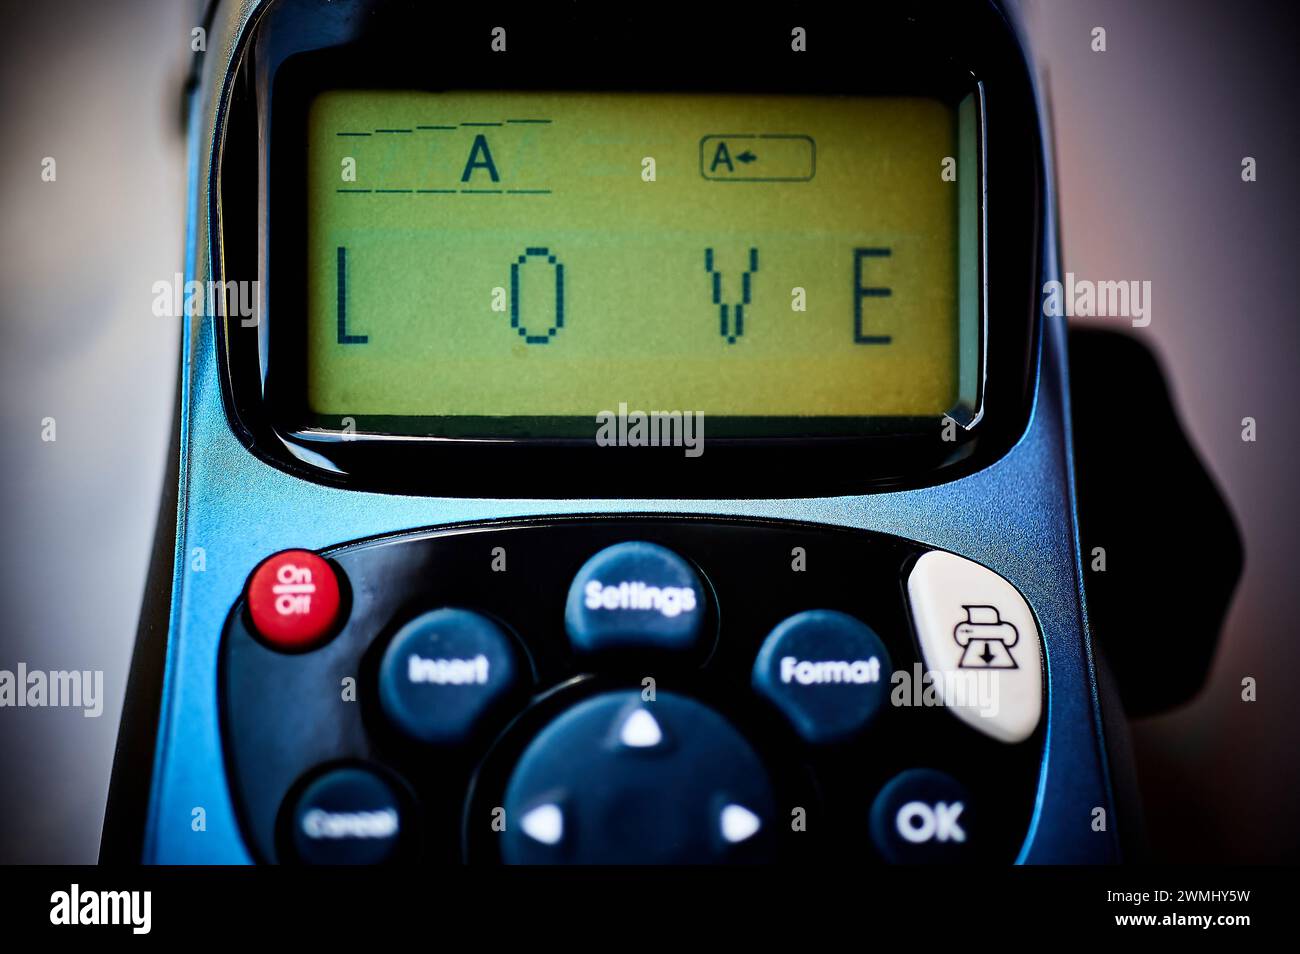 Labeling machine showing the word love on its screen, symbolizing a modern and technological expression of love. Stock Photo